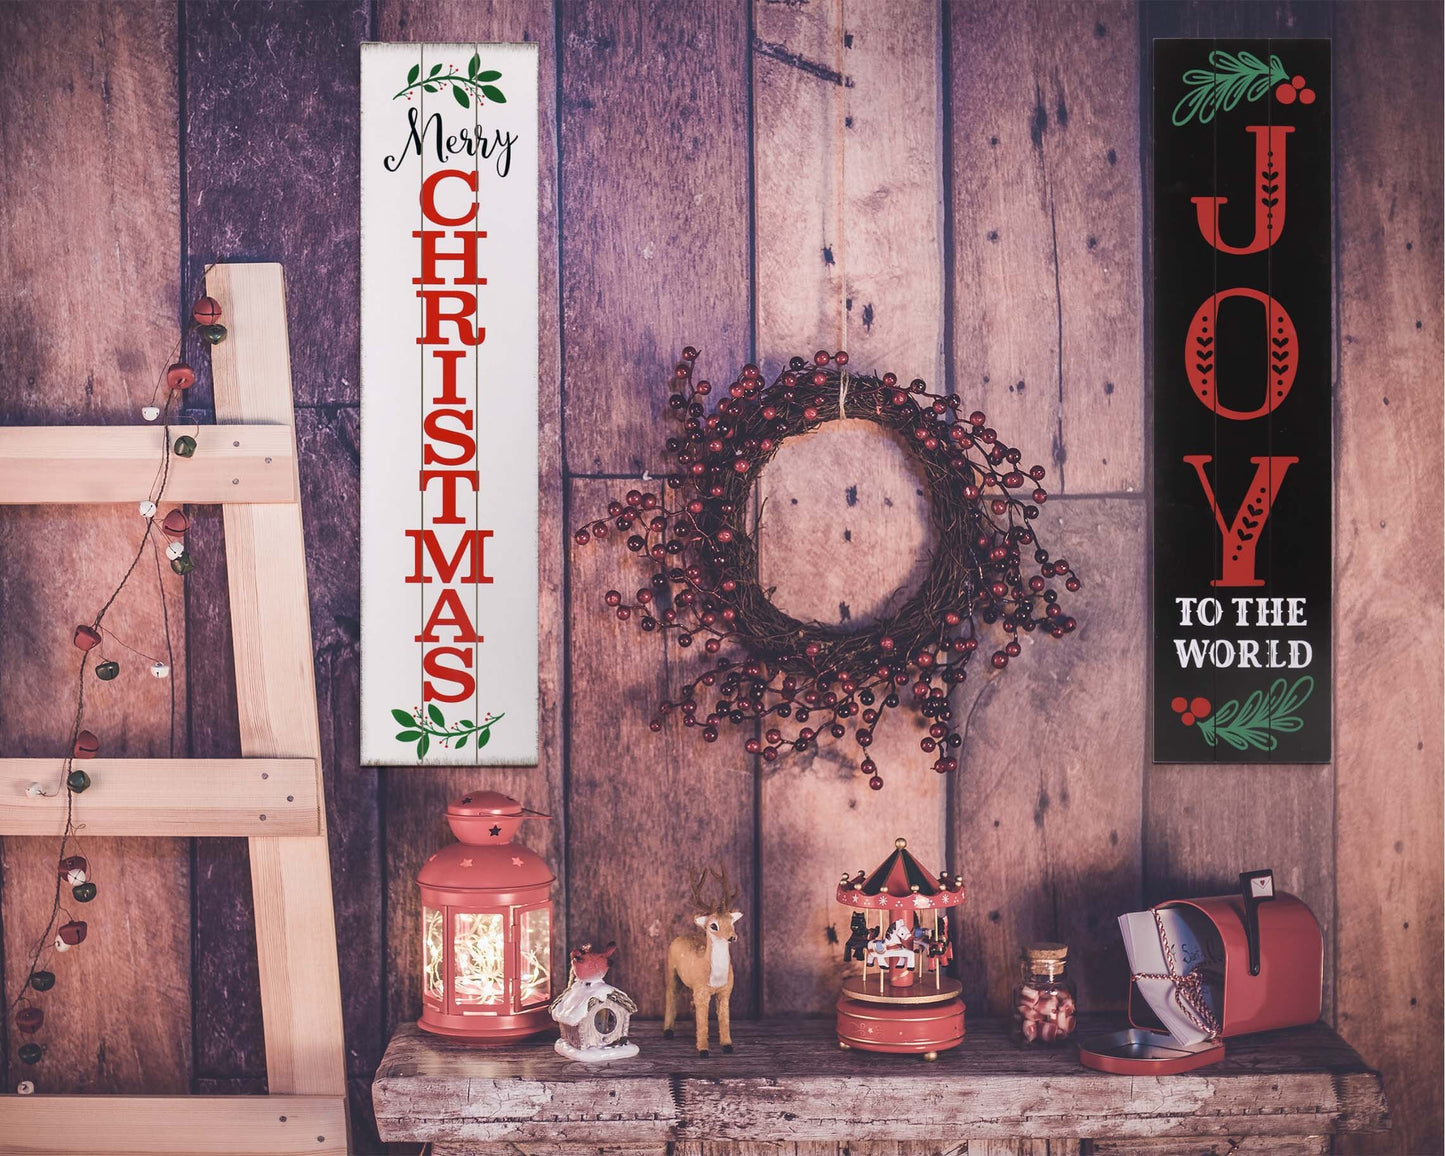 36IN Merry Christmas / JOY To The World Reversible Porch Sign | Festive Double-Sided Holiday Decor